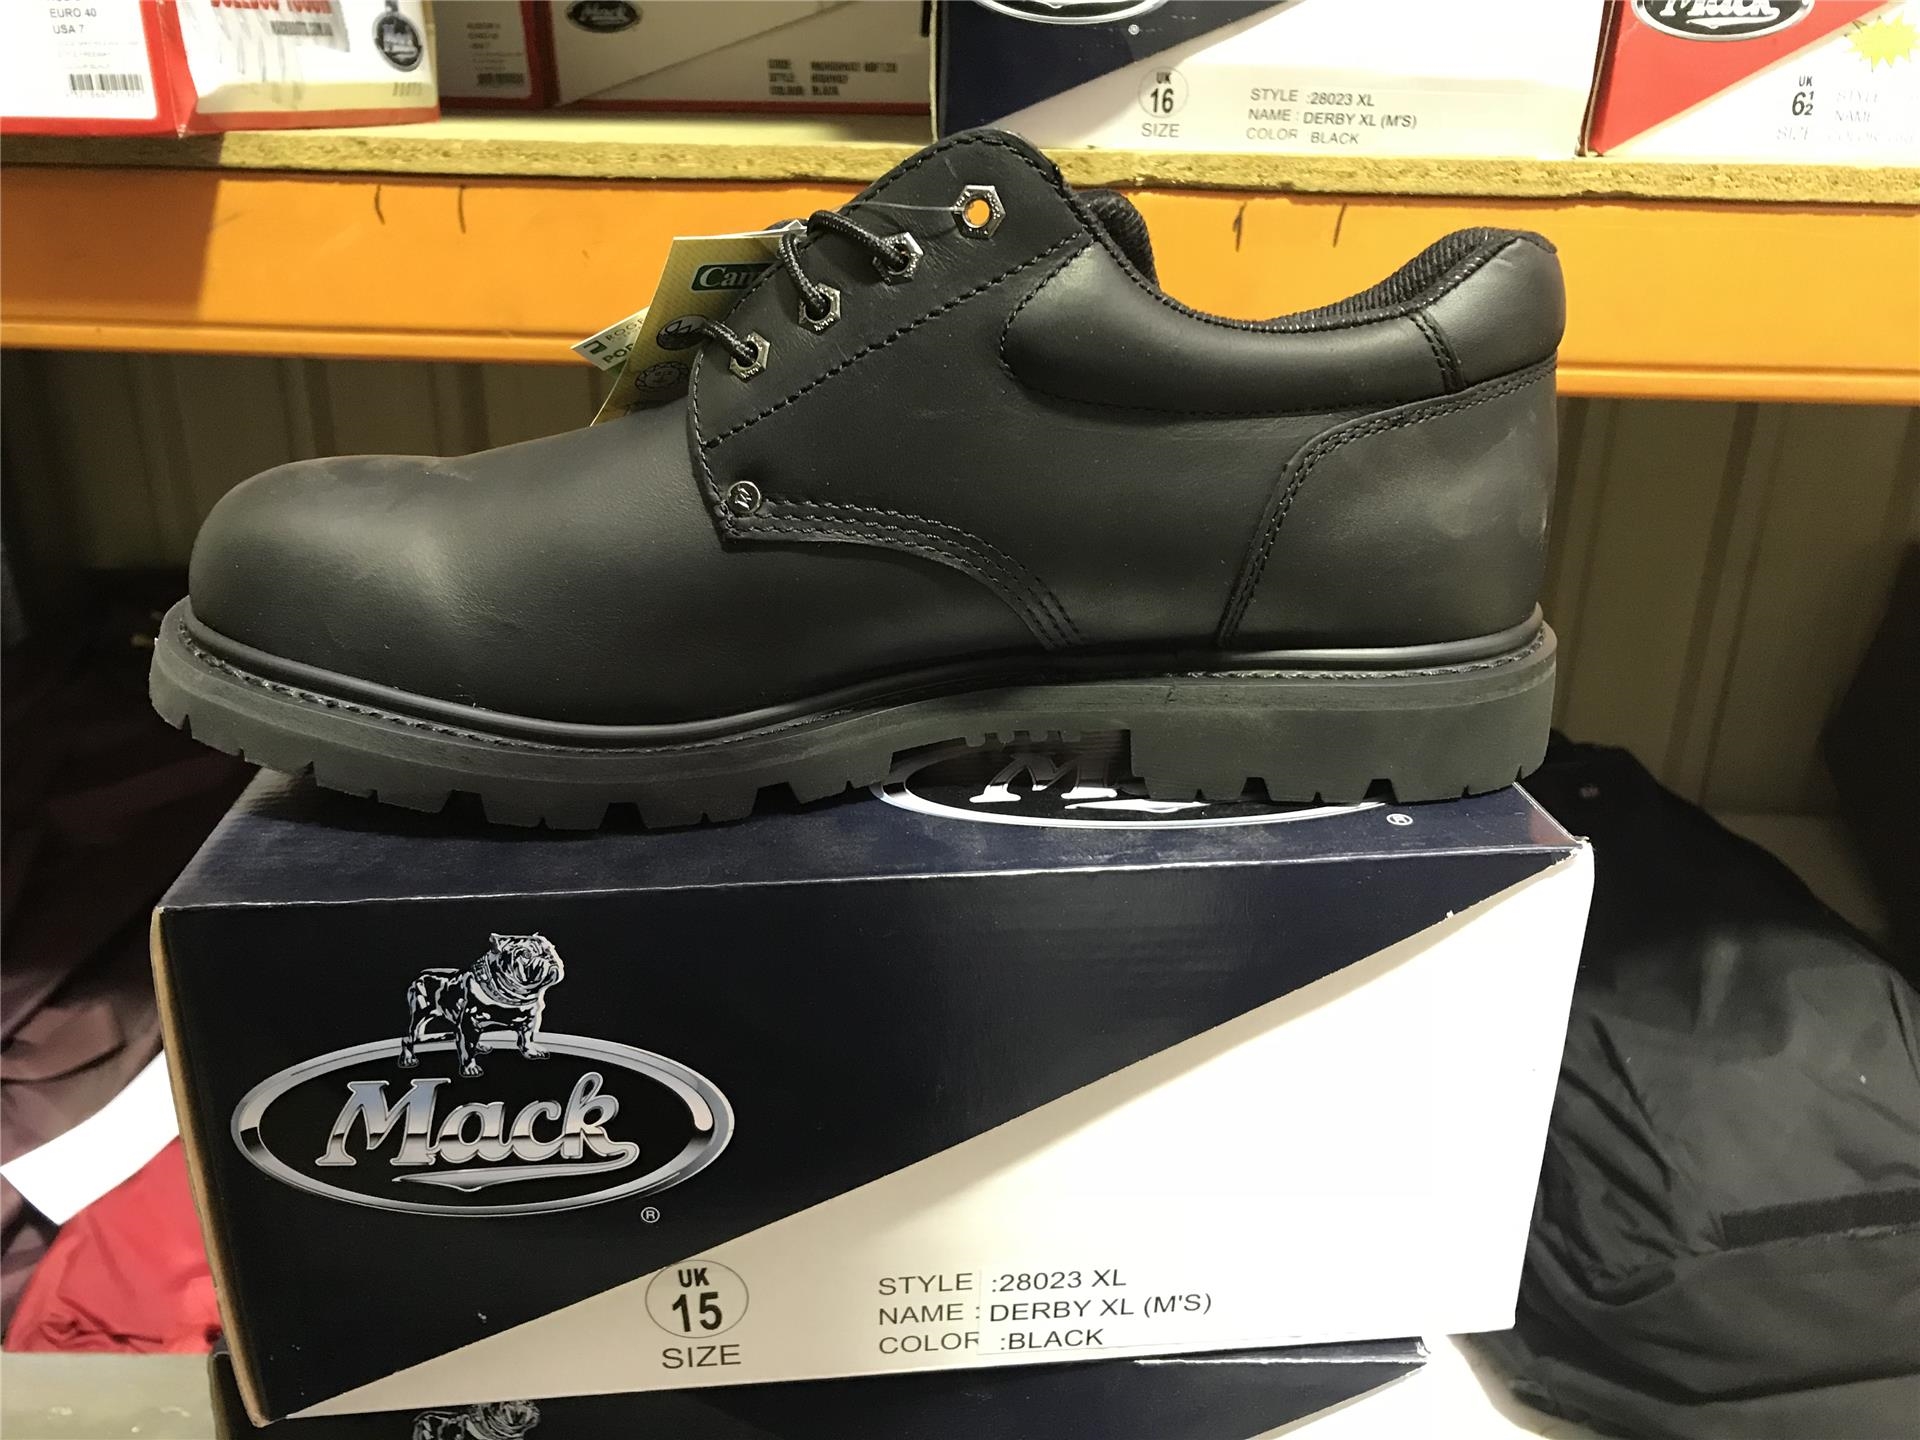 Mack Shoes, Black, Style: Derby, UK Size: 15, Quantity of 4 Pairs ...